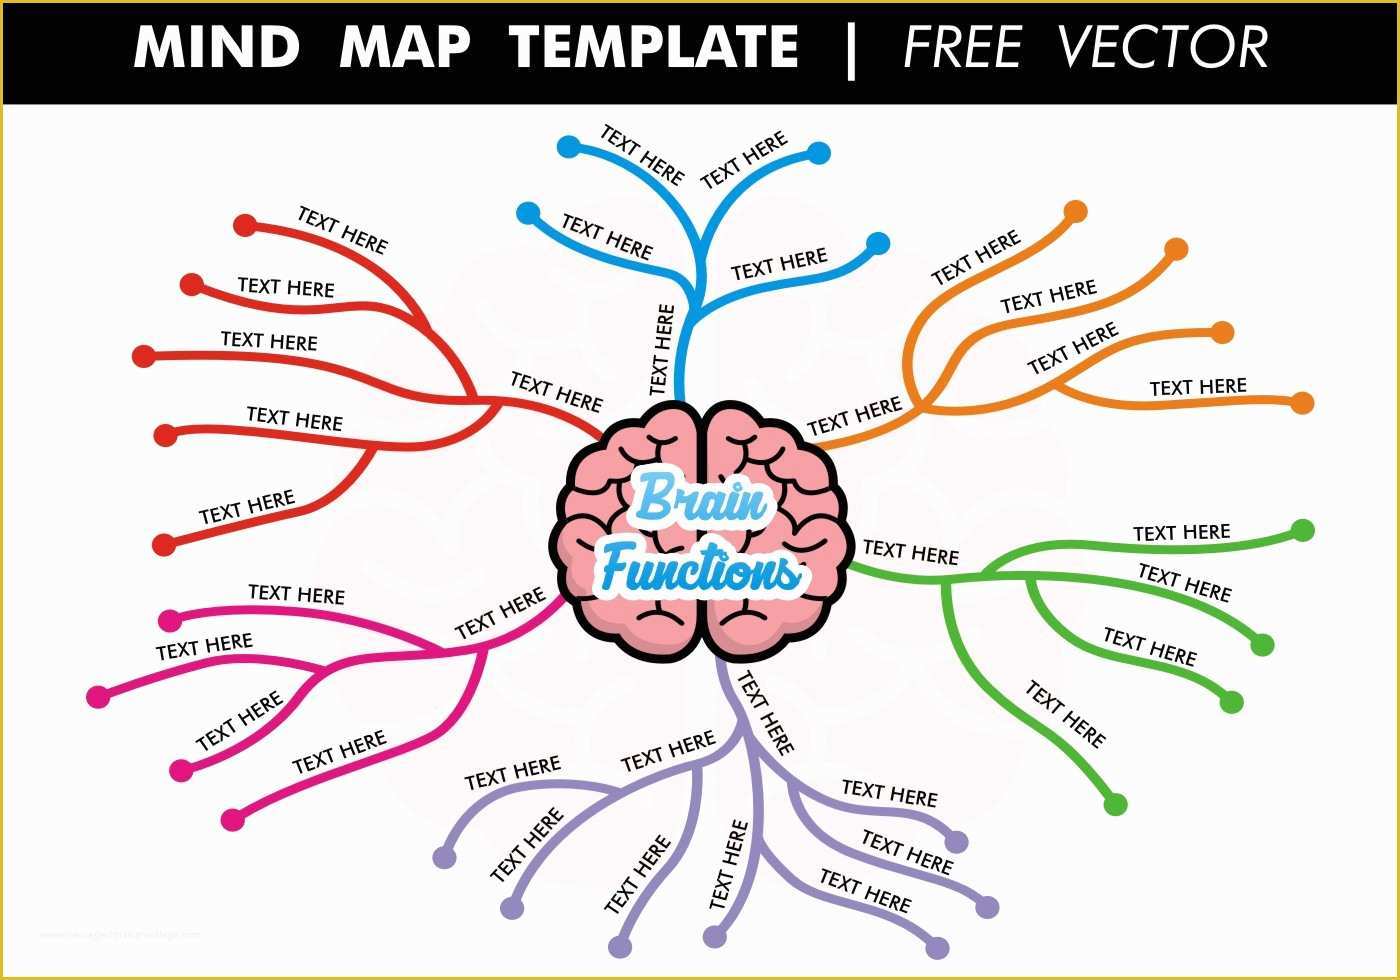 Free Mind Map Template Of Mind Map Template Vector Download Free Vector Art Stock